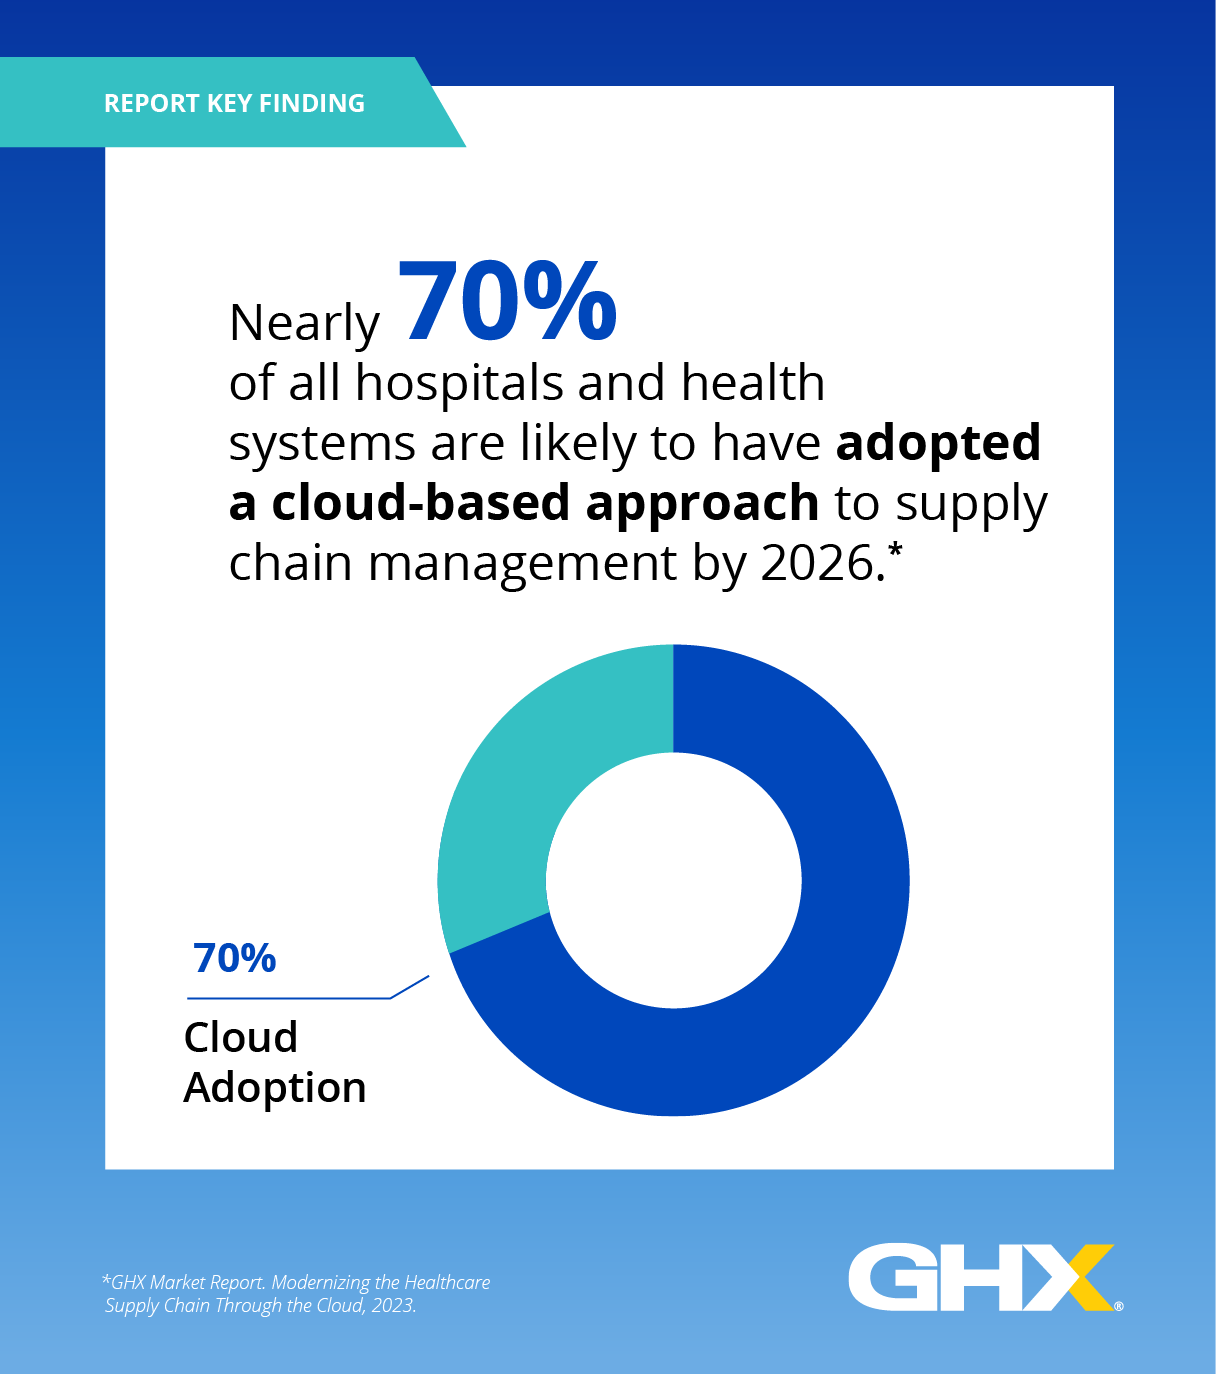 Adoption of Cloud Based Approach